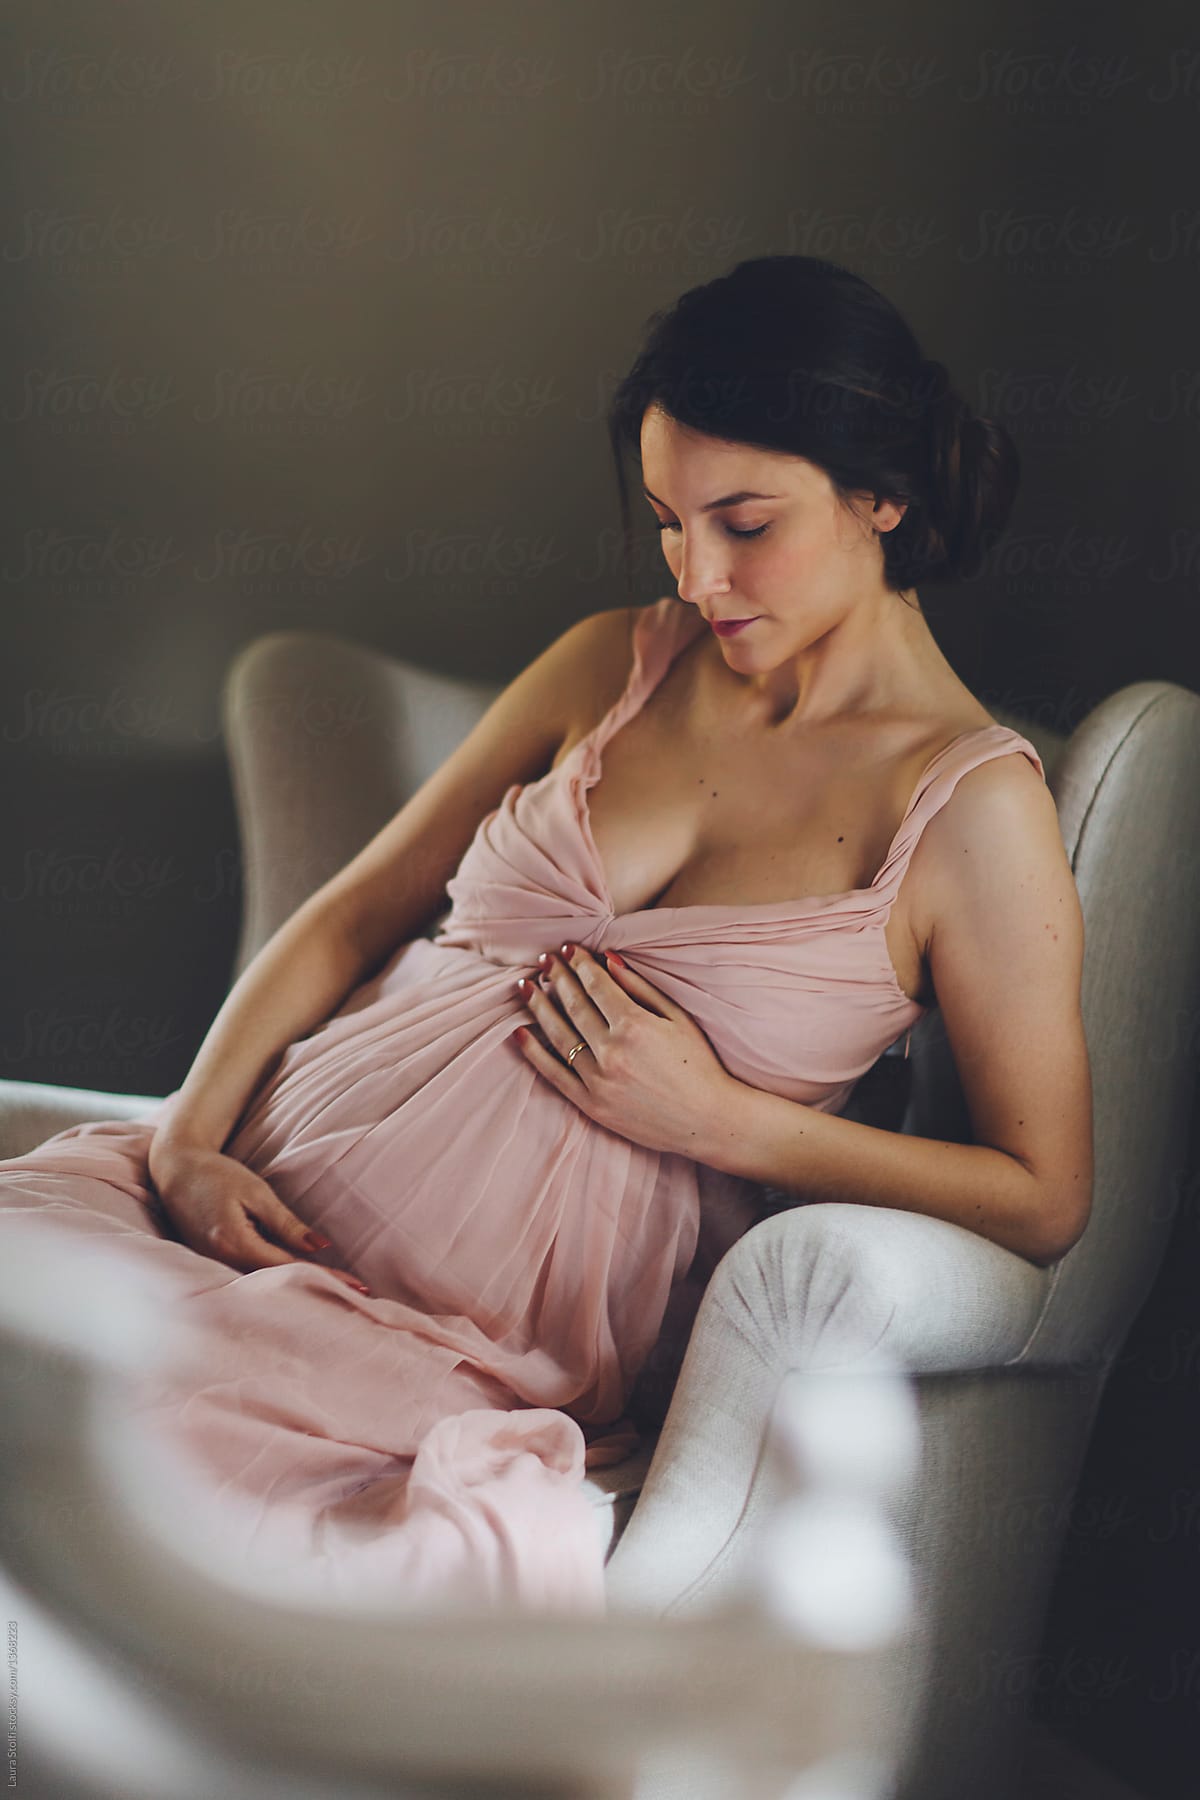 Pregnant woman sits on armchair wearing a beautiful pale pink dress by Laura Stolfi for Stocksy United